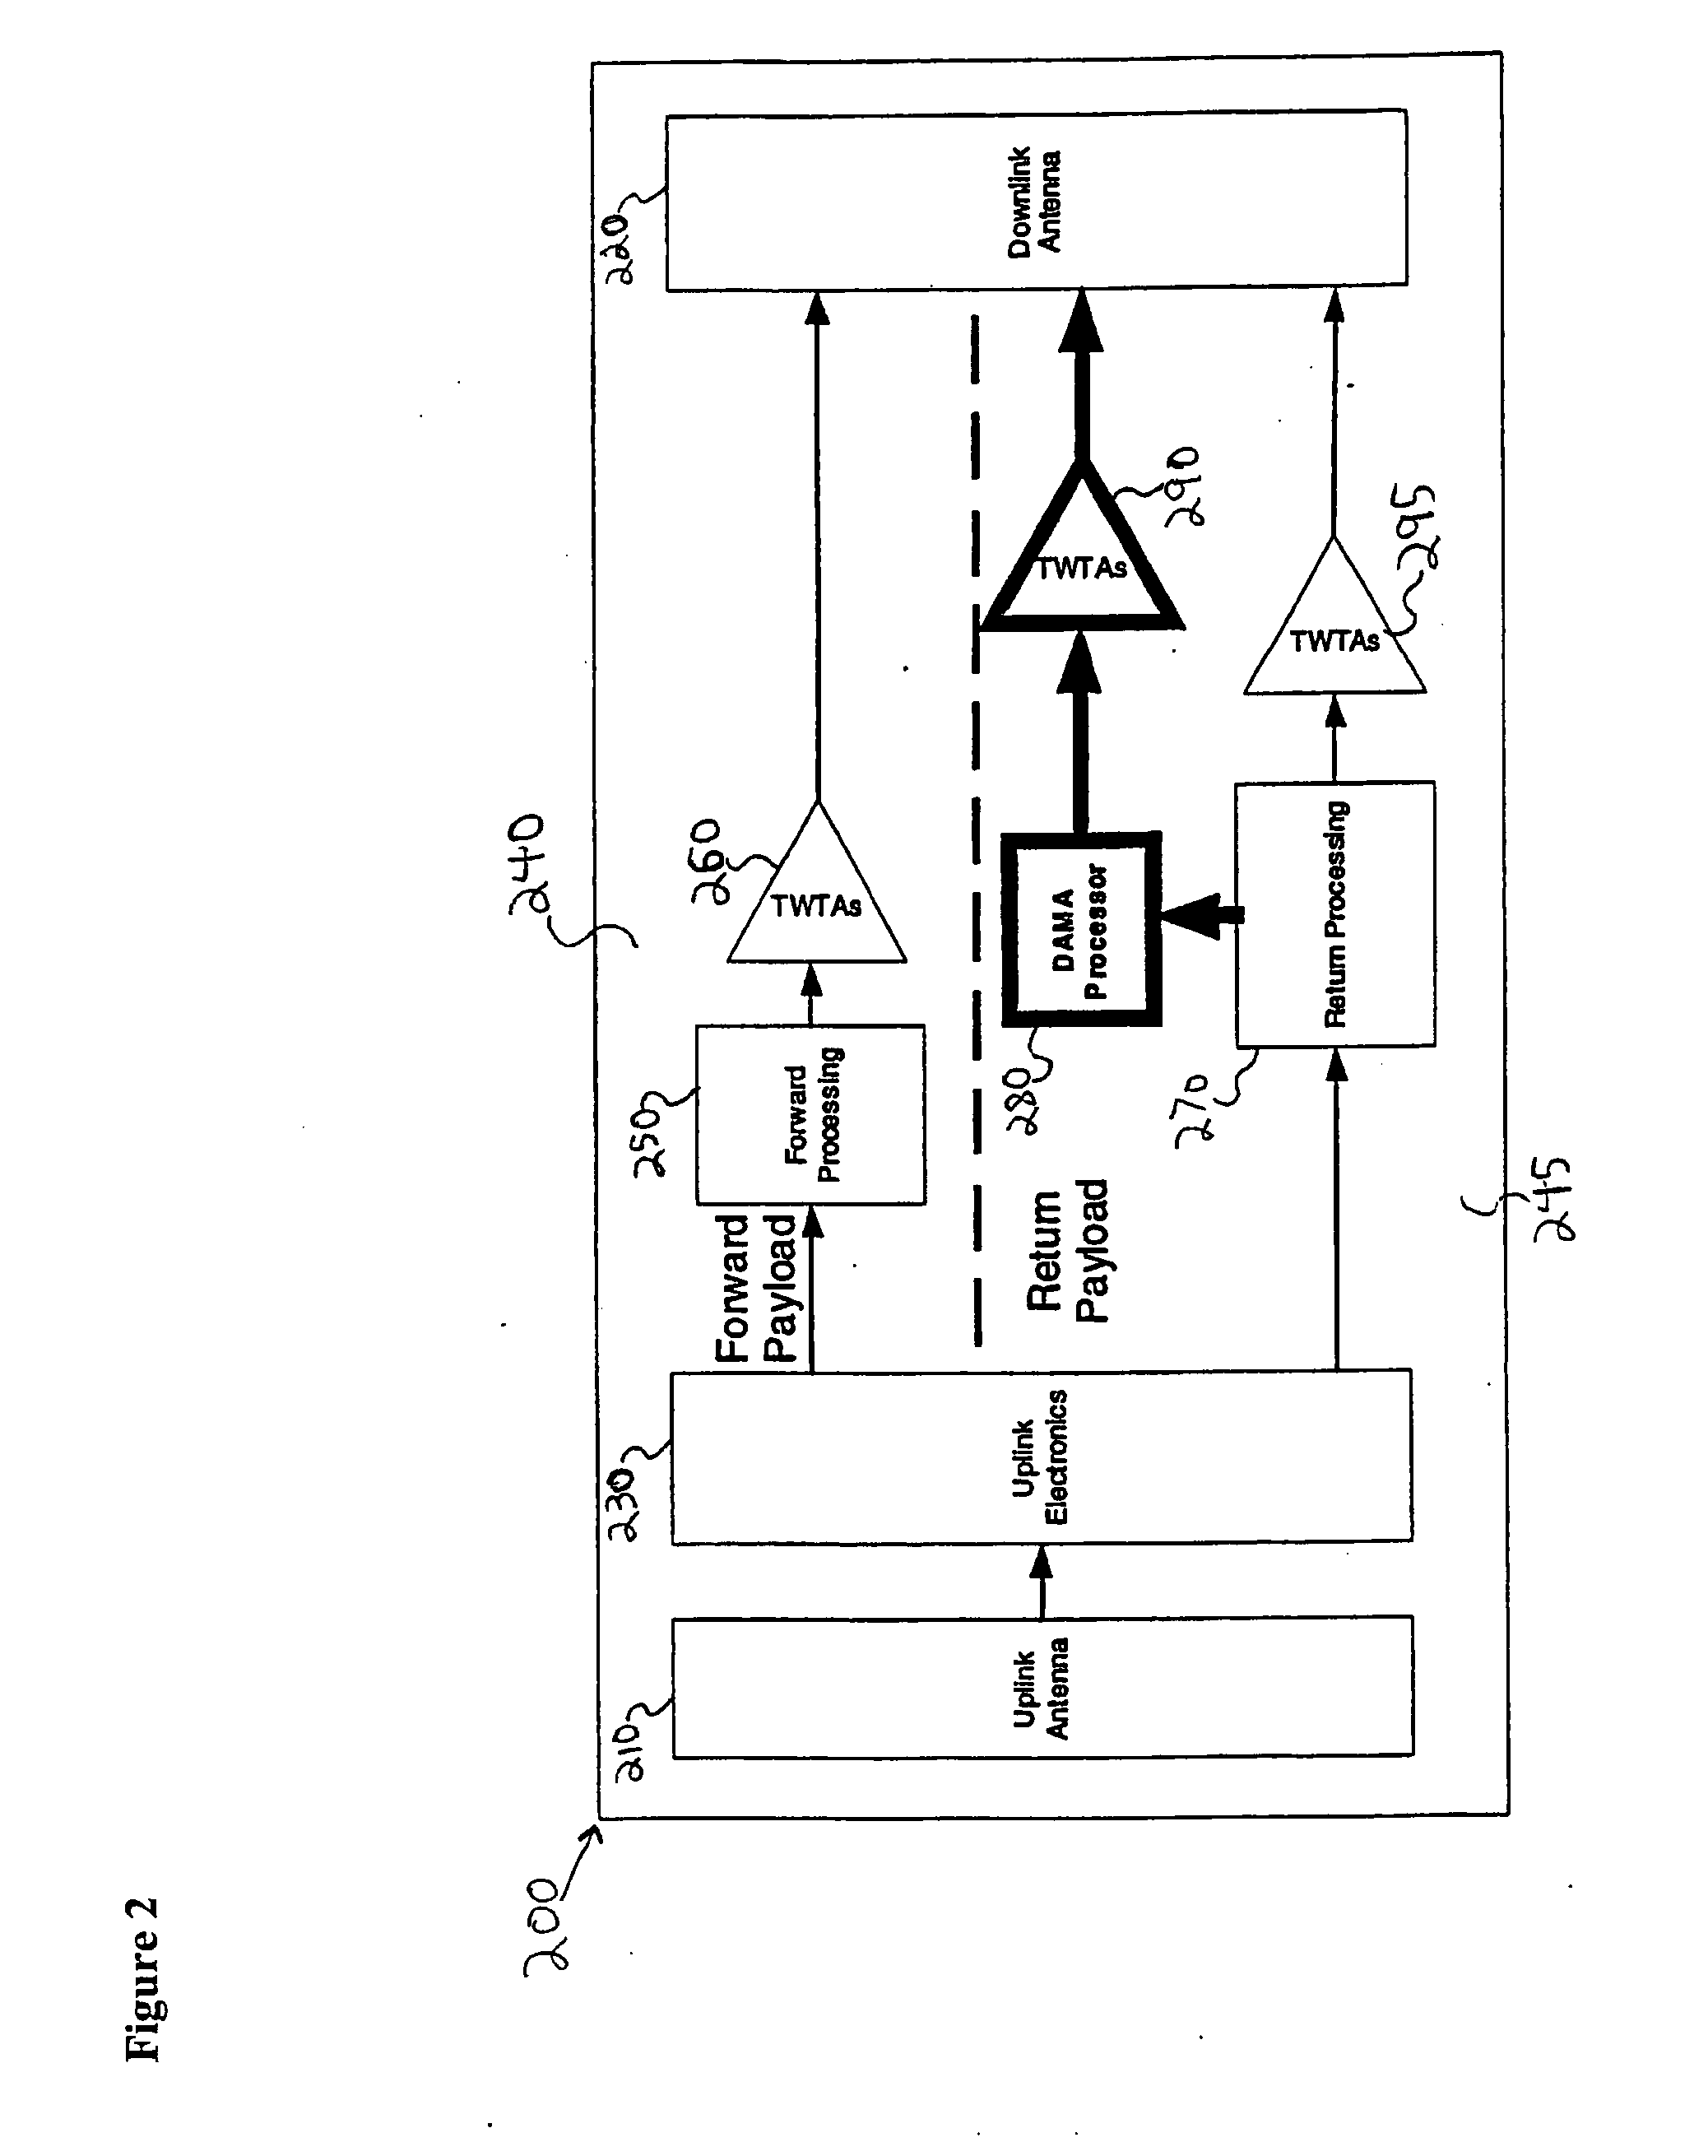 System and method for satellite communication with a hybrid payload and DAMA support